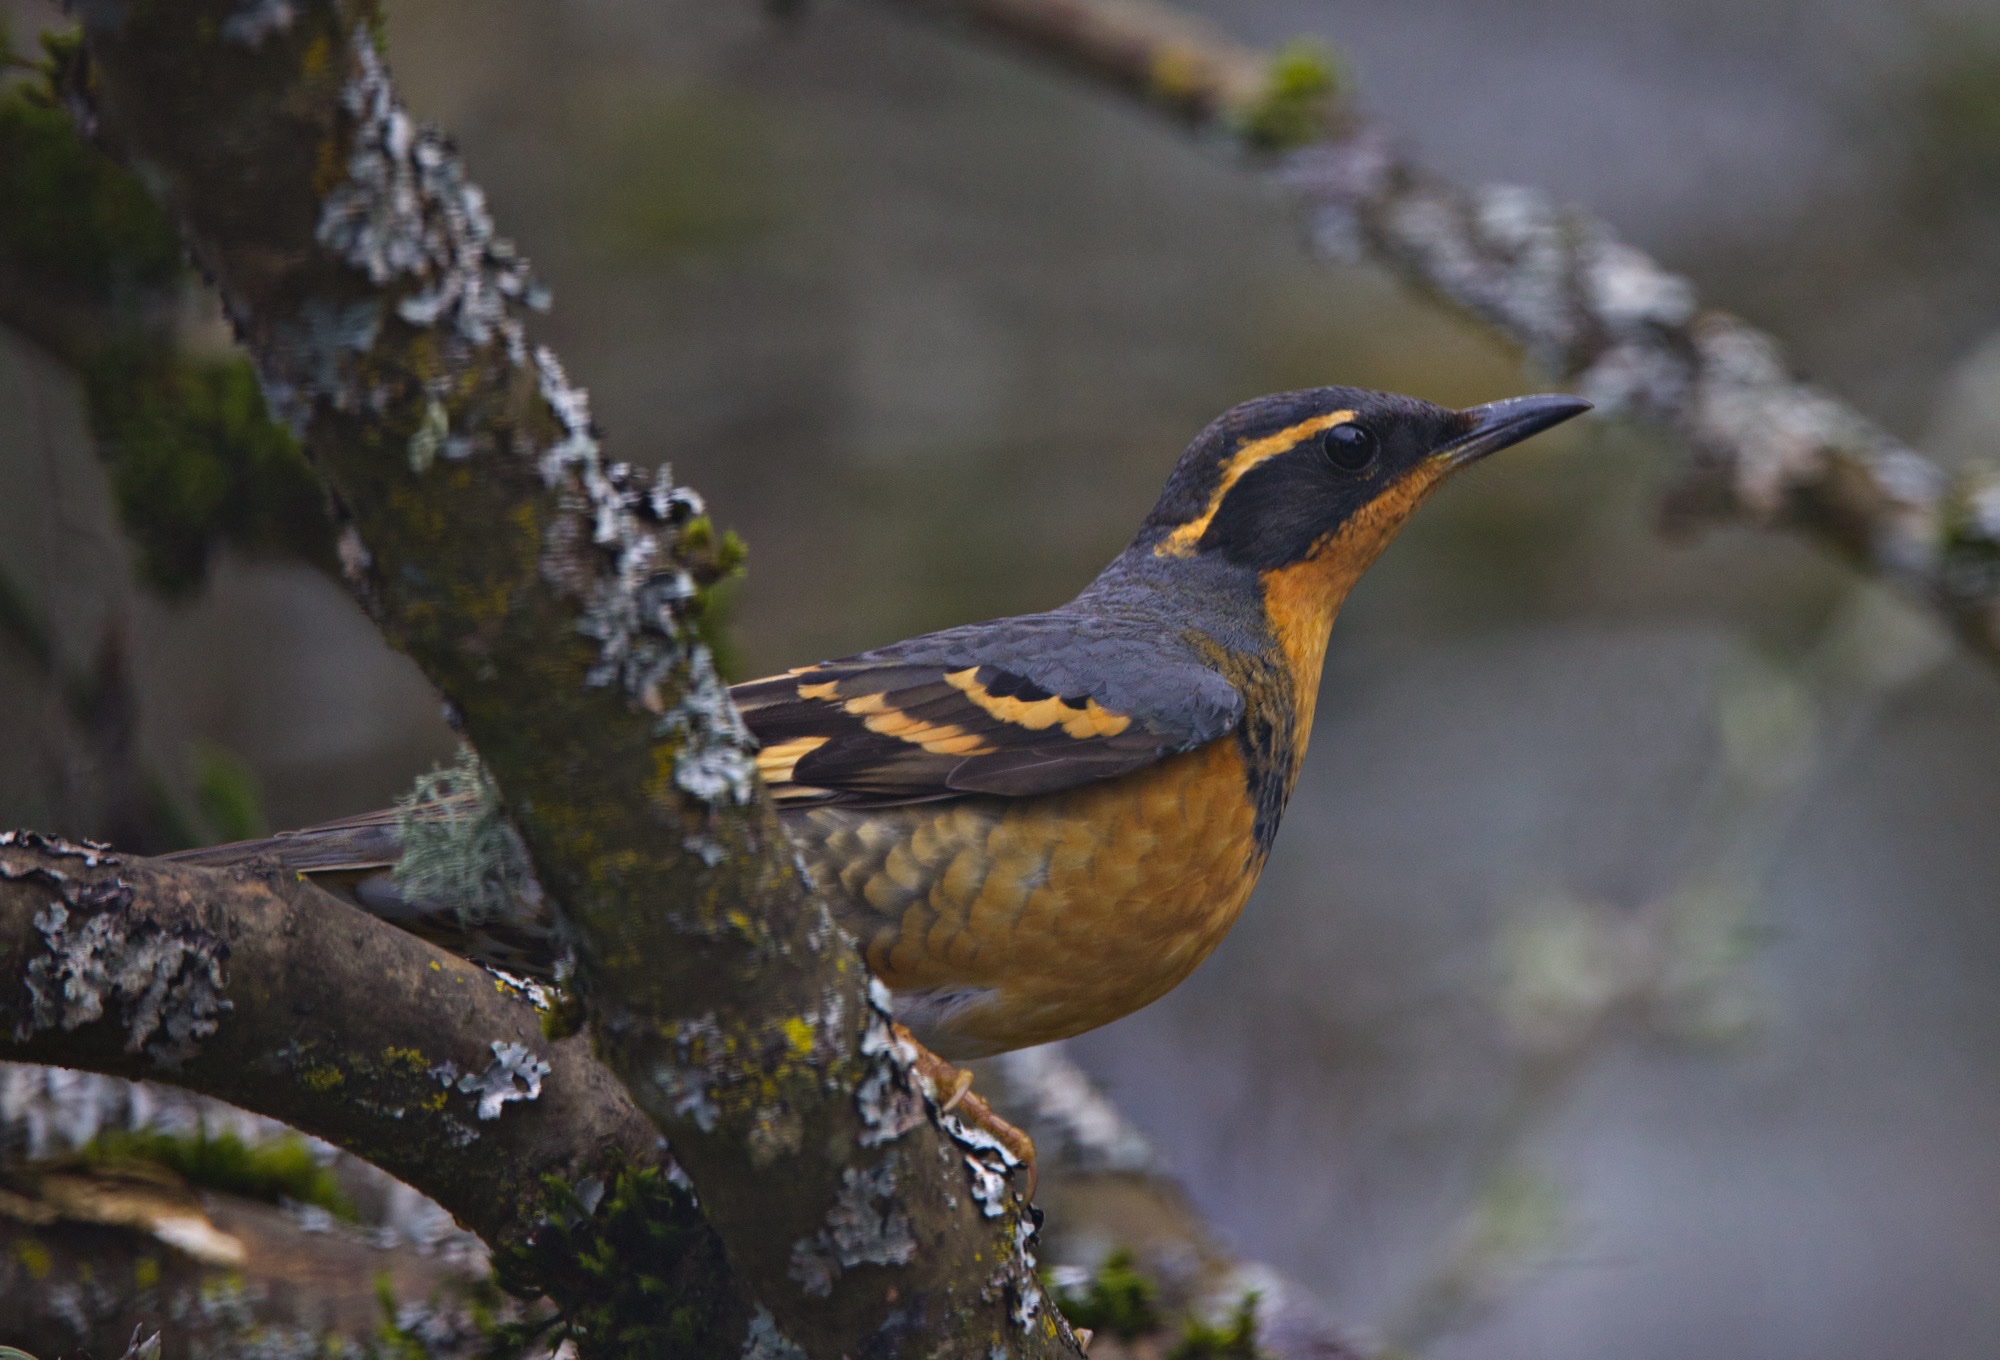 Varied Thrush perched in a tree in our yard - one of two birds.